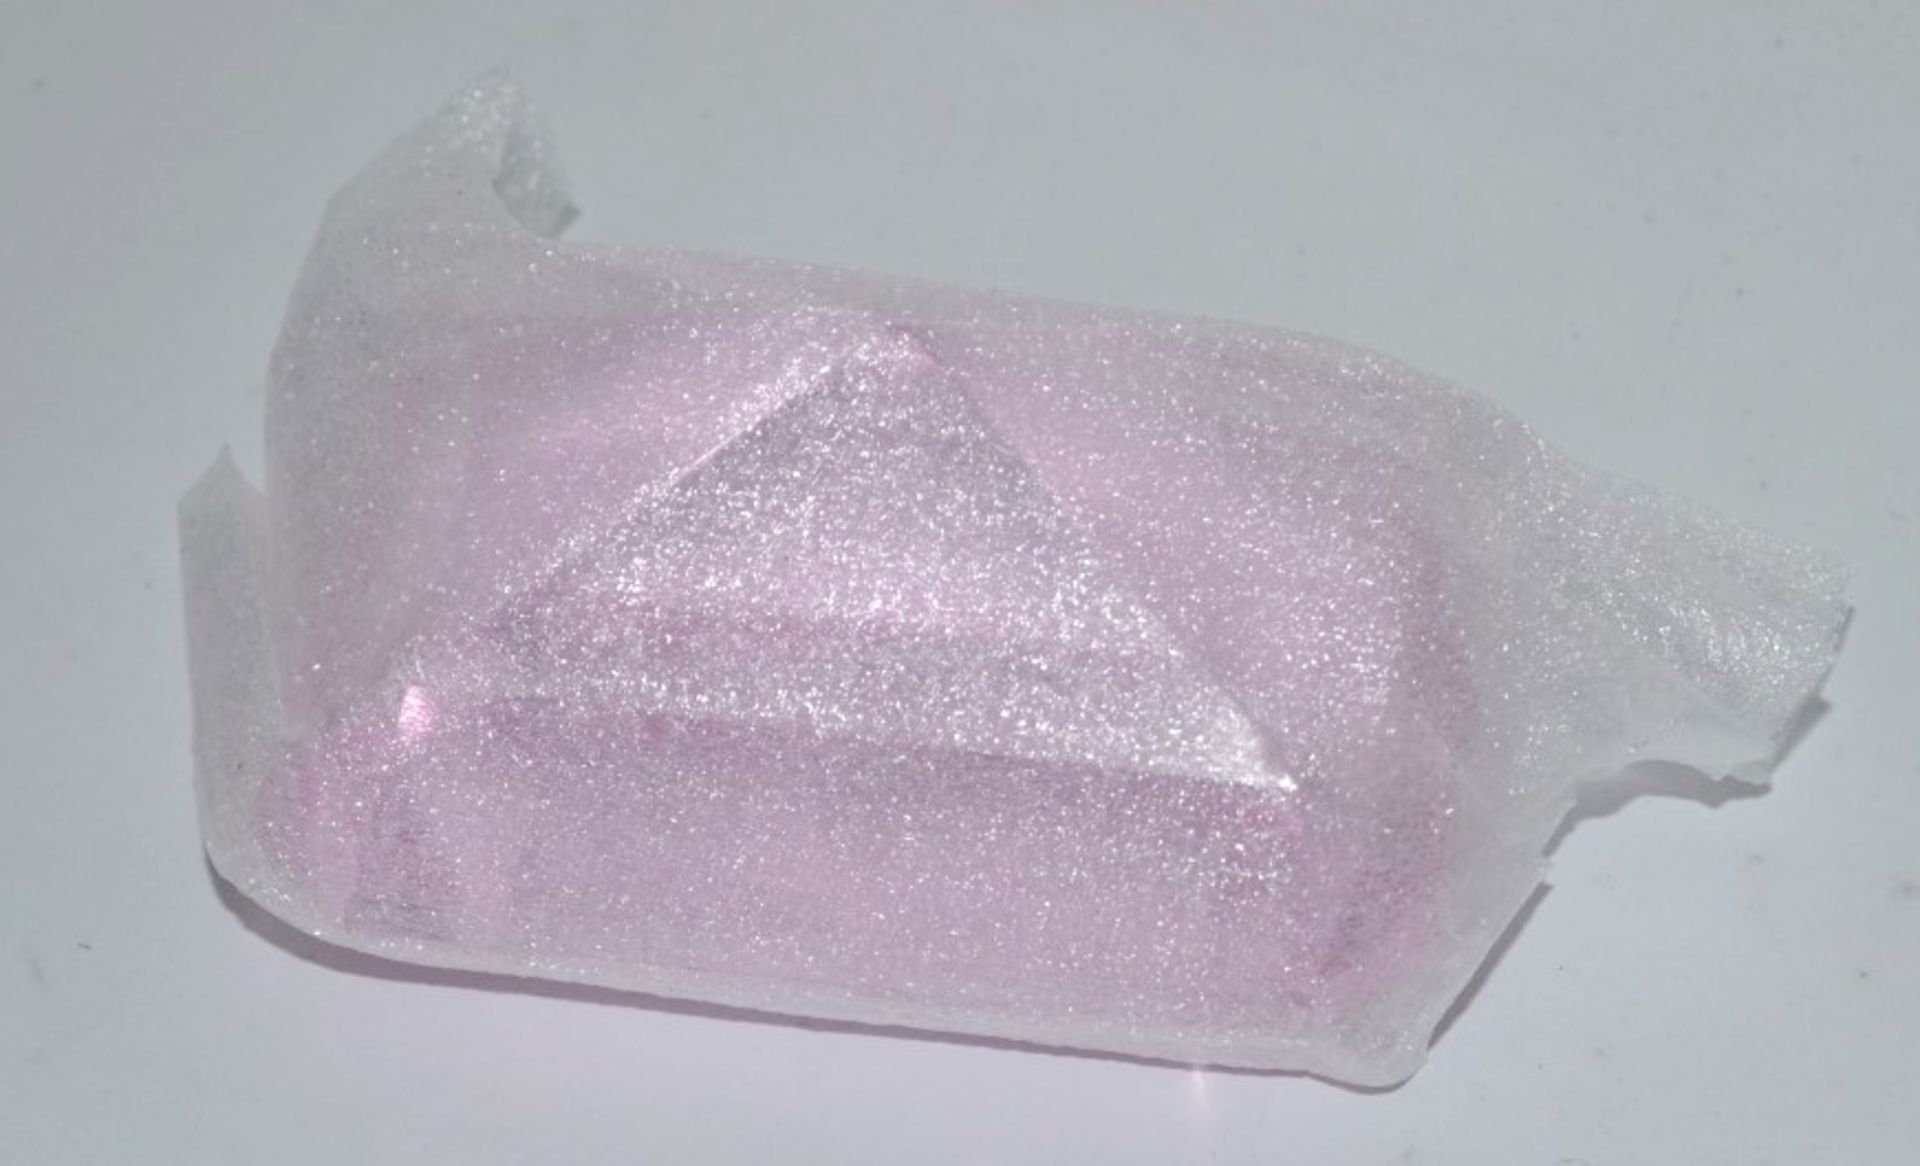 10 x ICE London Emerald Shaped Crystal Paperweight - Colour: Pink - 100mm In Diameter - New & - Image 4 of 4